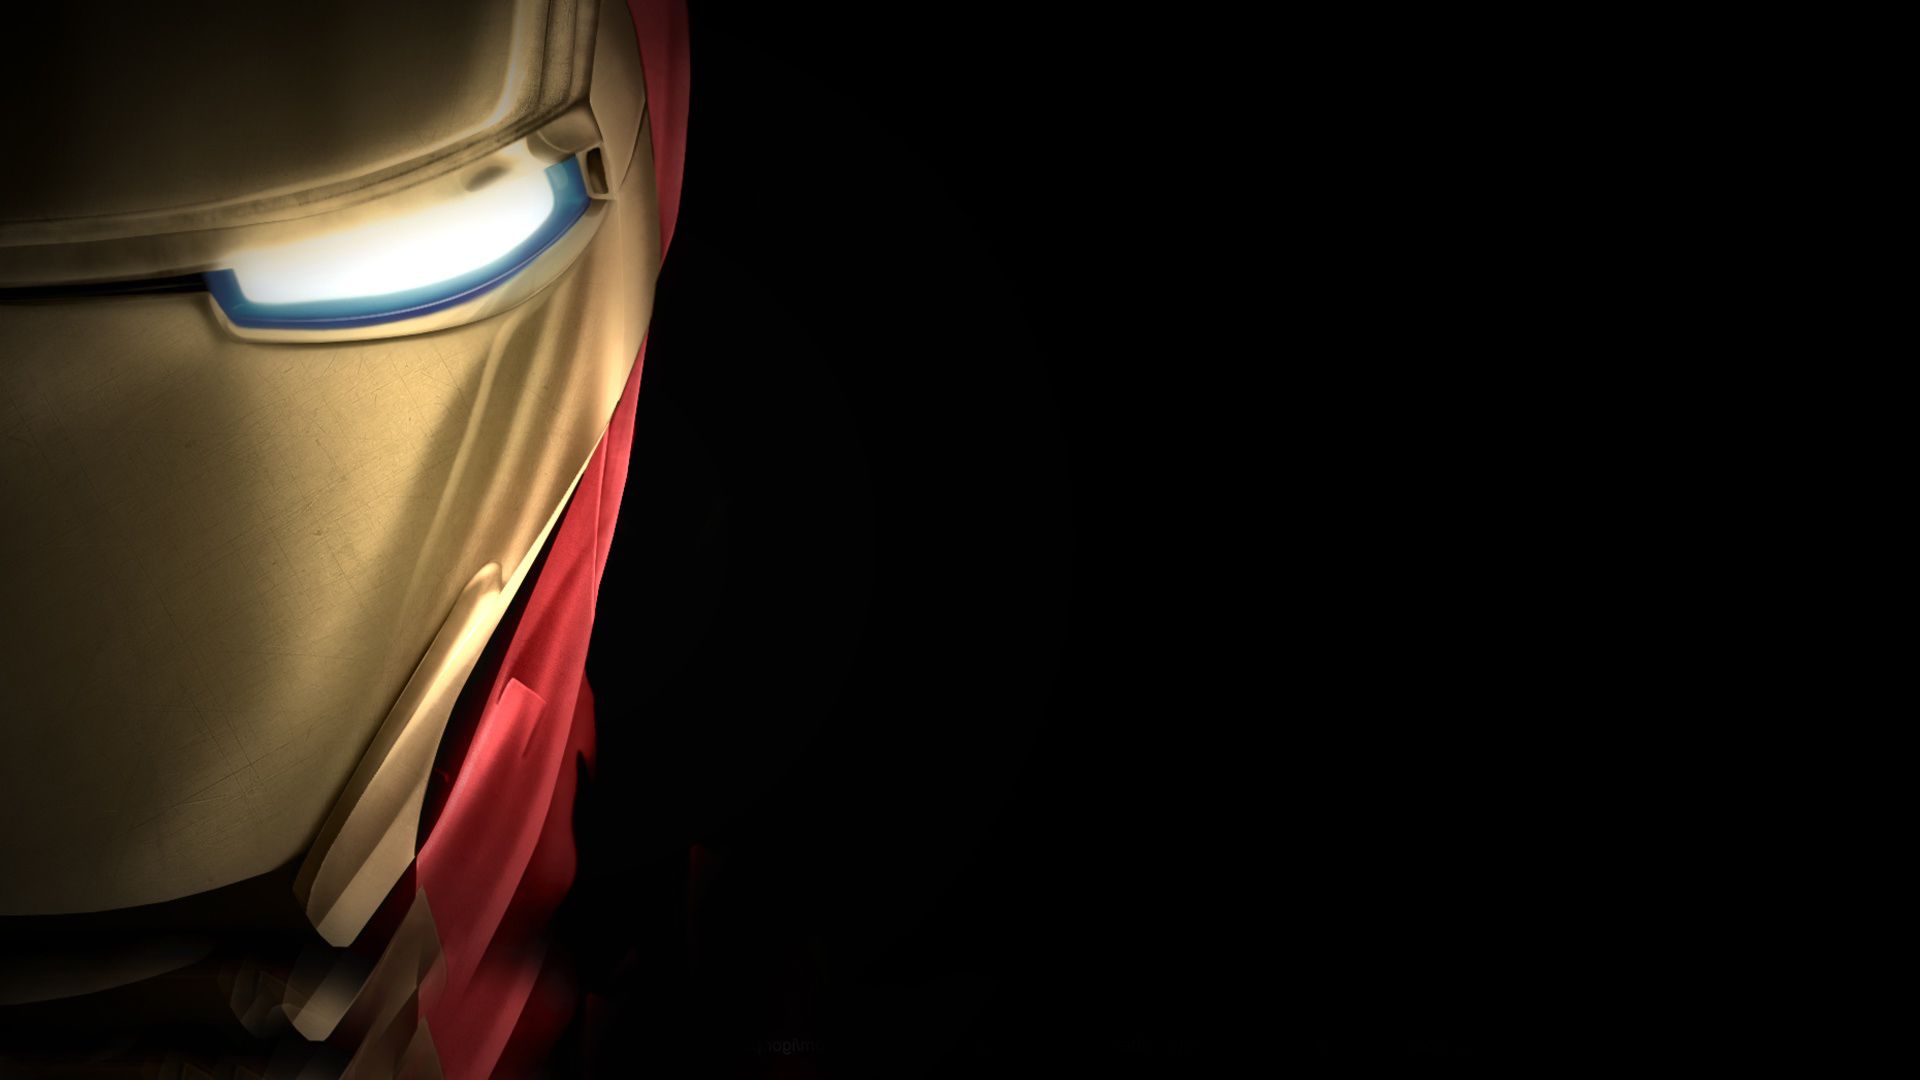 Iron Man HD Picture Wallpapers 7797 - HD Wallpaper Site